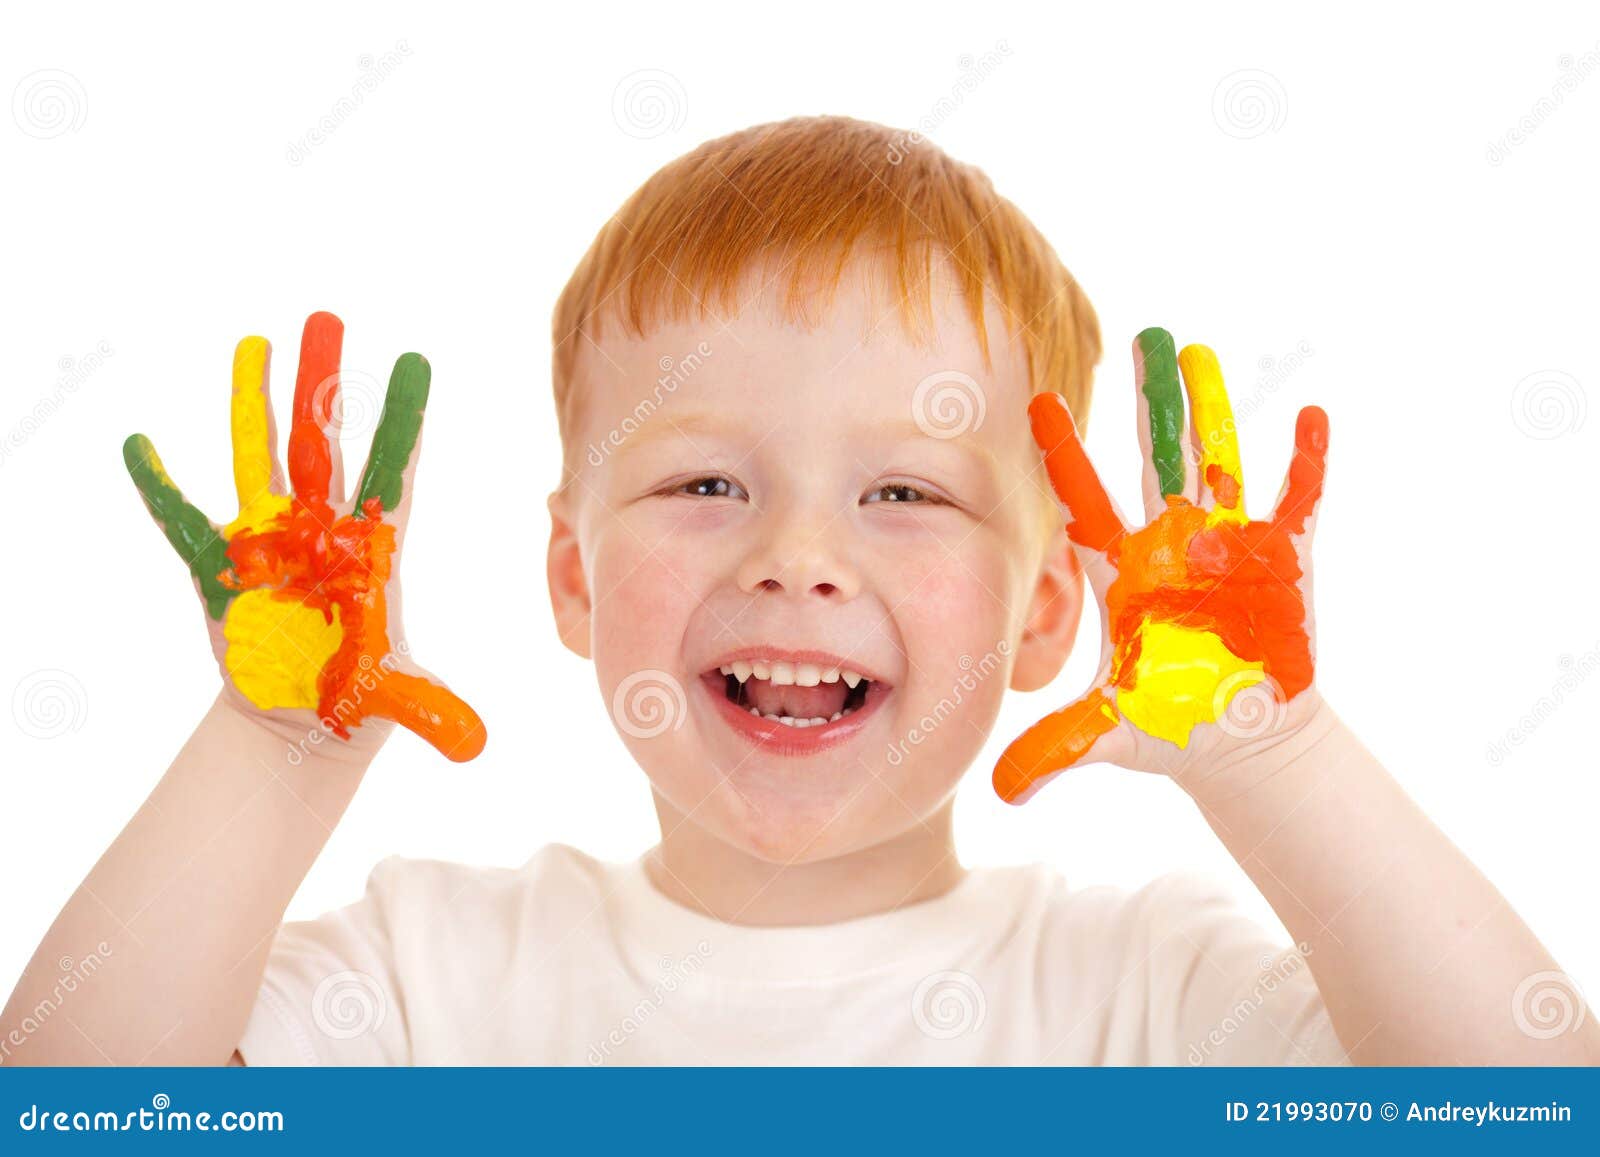 red-haired child hands painted in bright colors